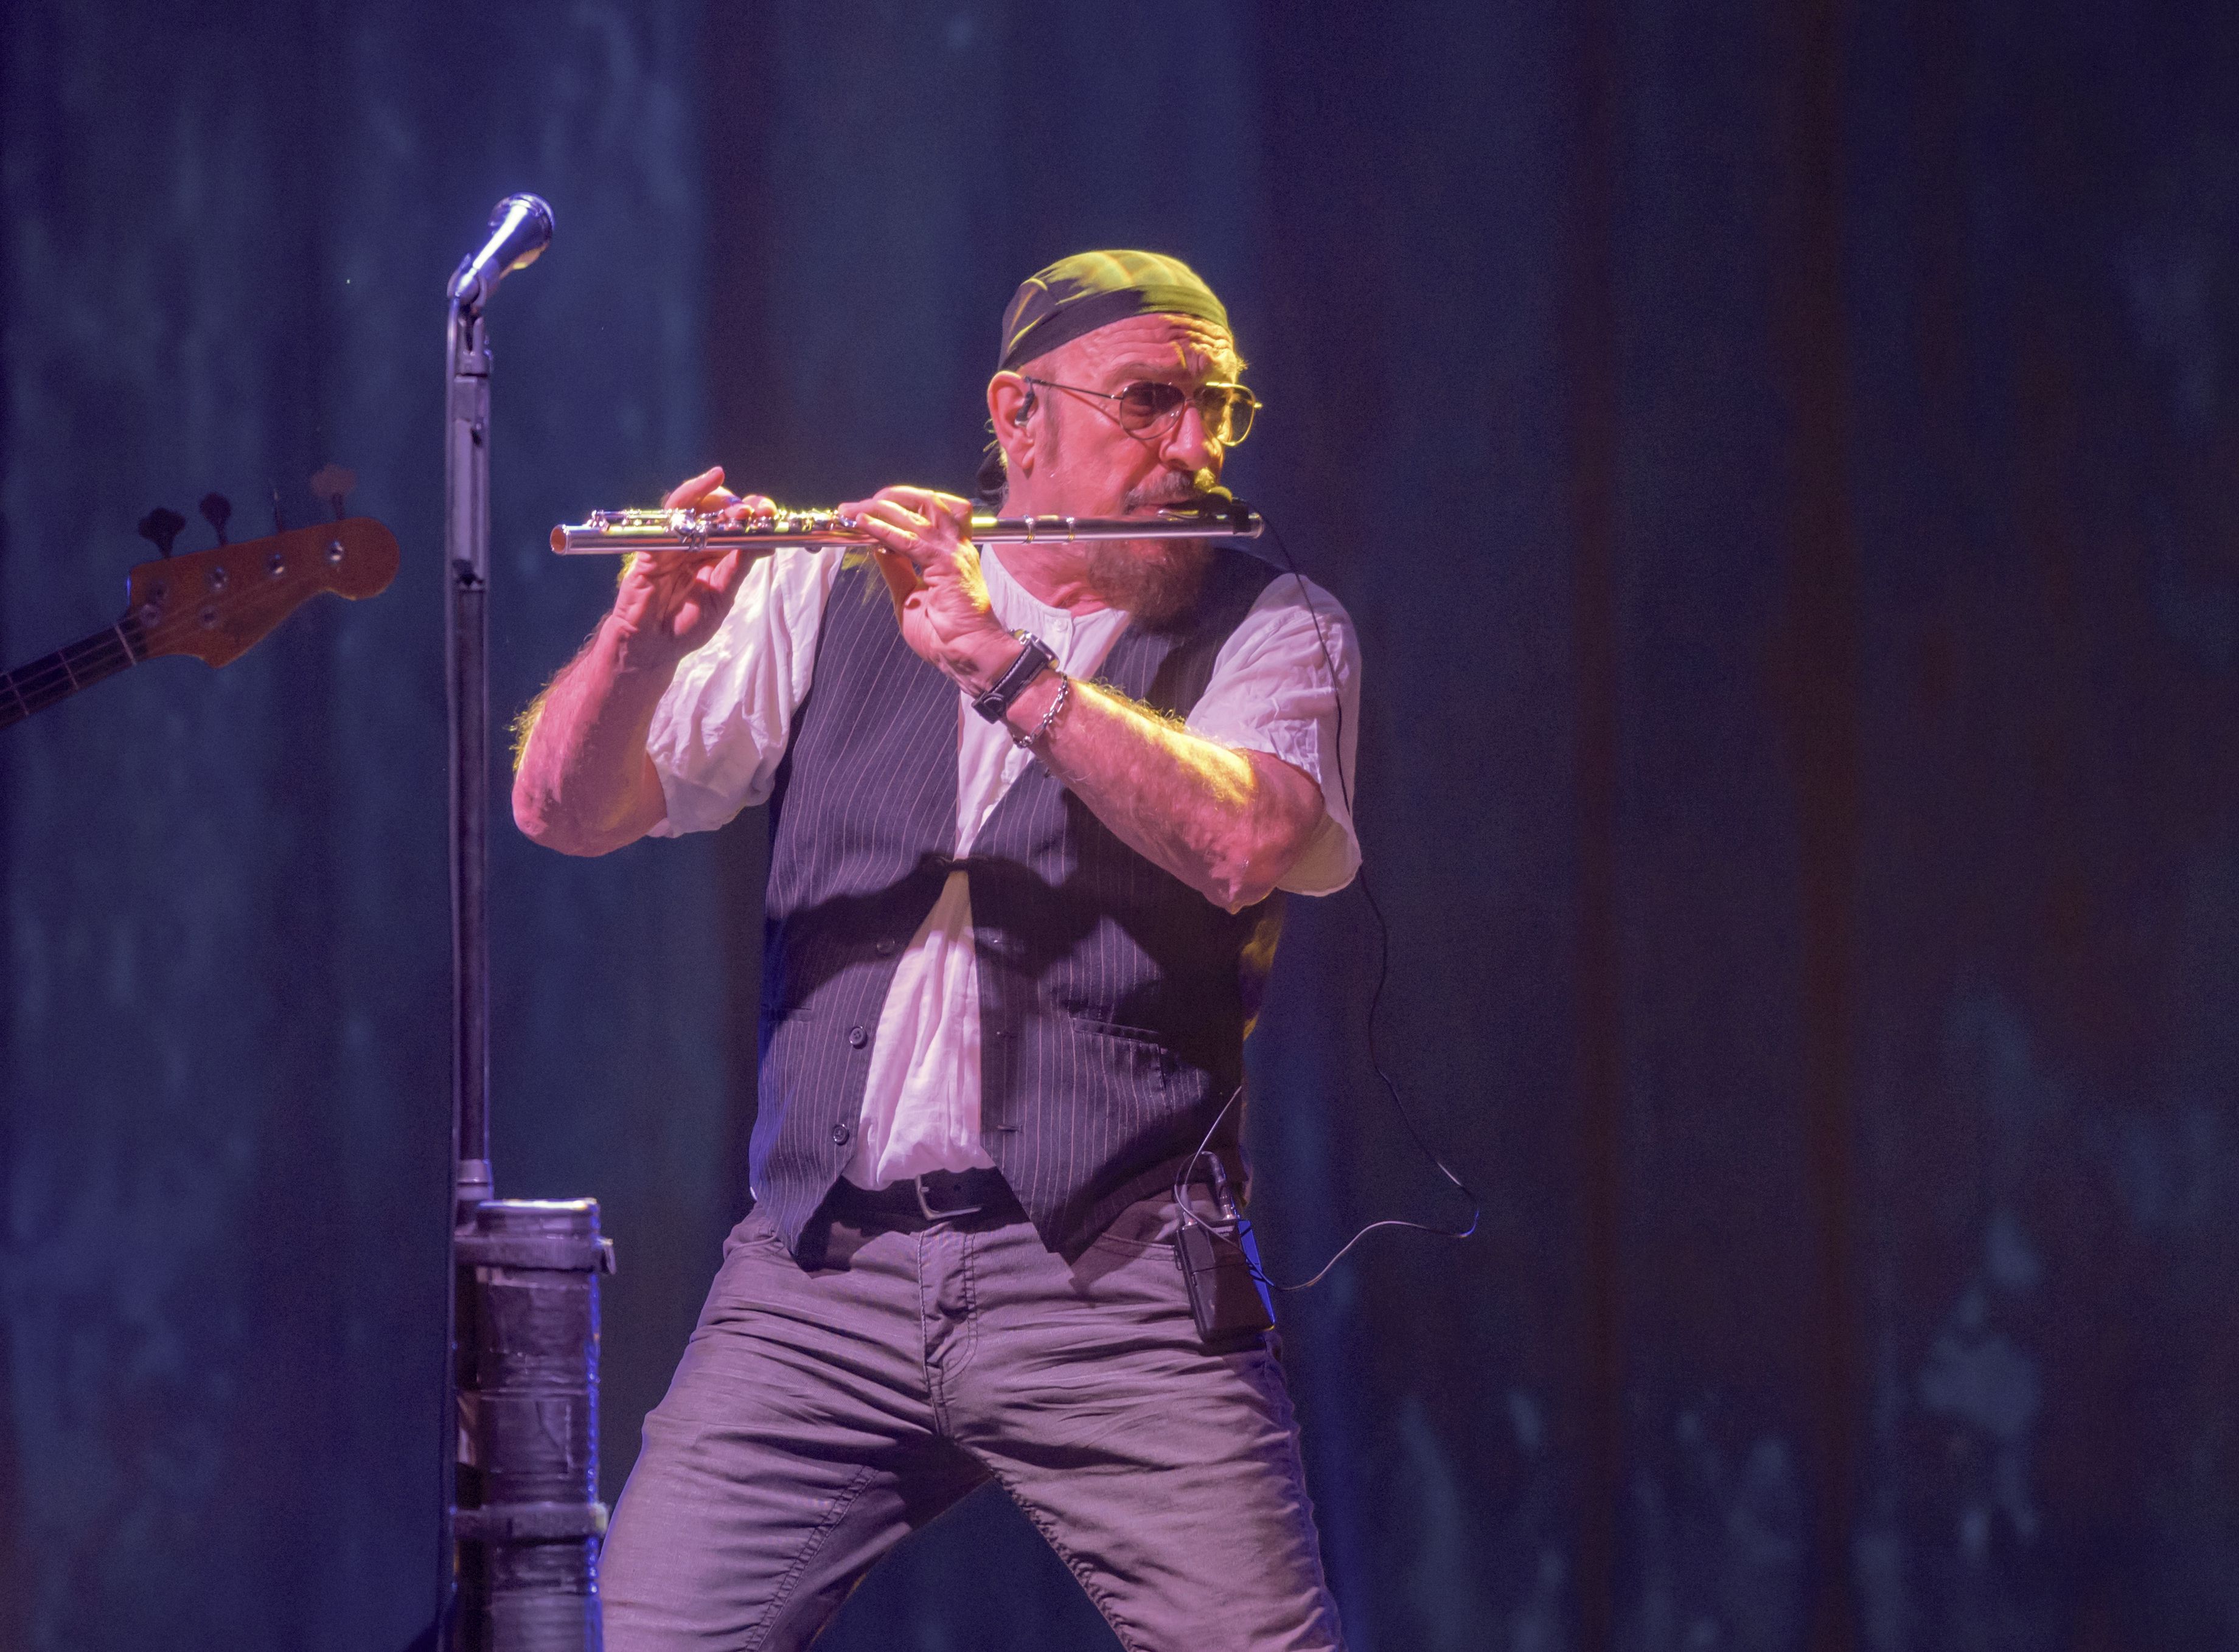 Jethro Tull's Ian Anderson has a plan to bring back live gigs safely